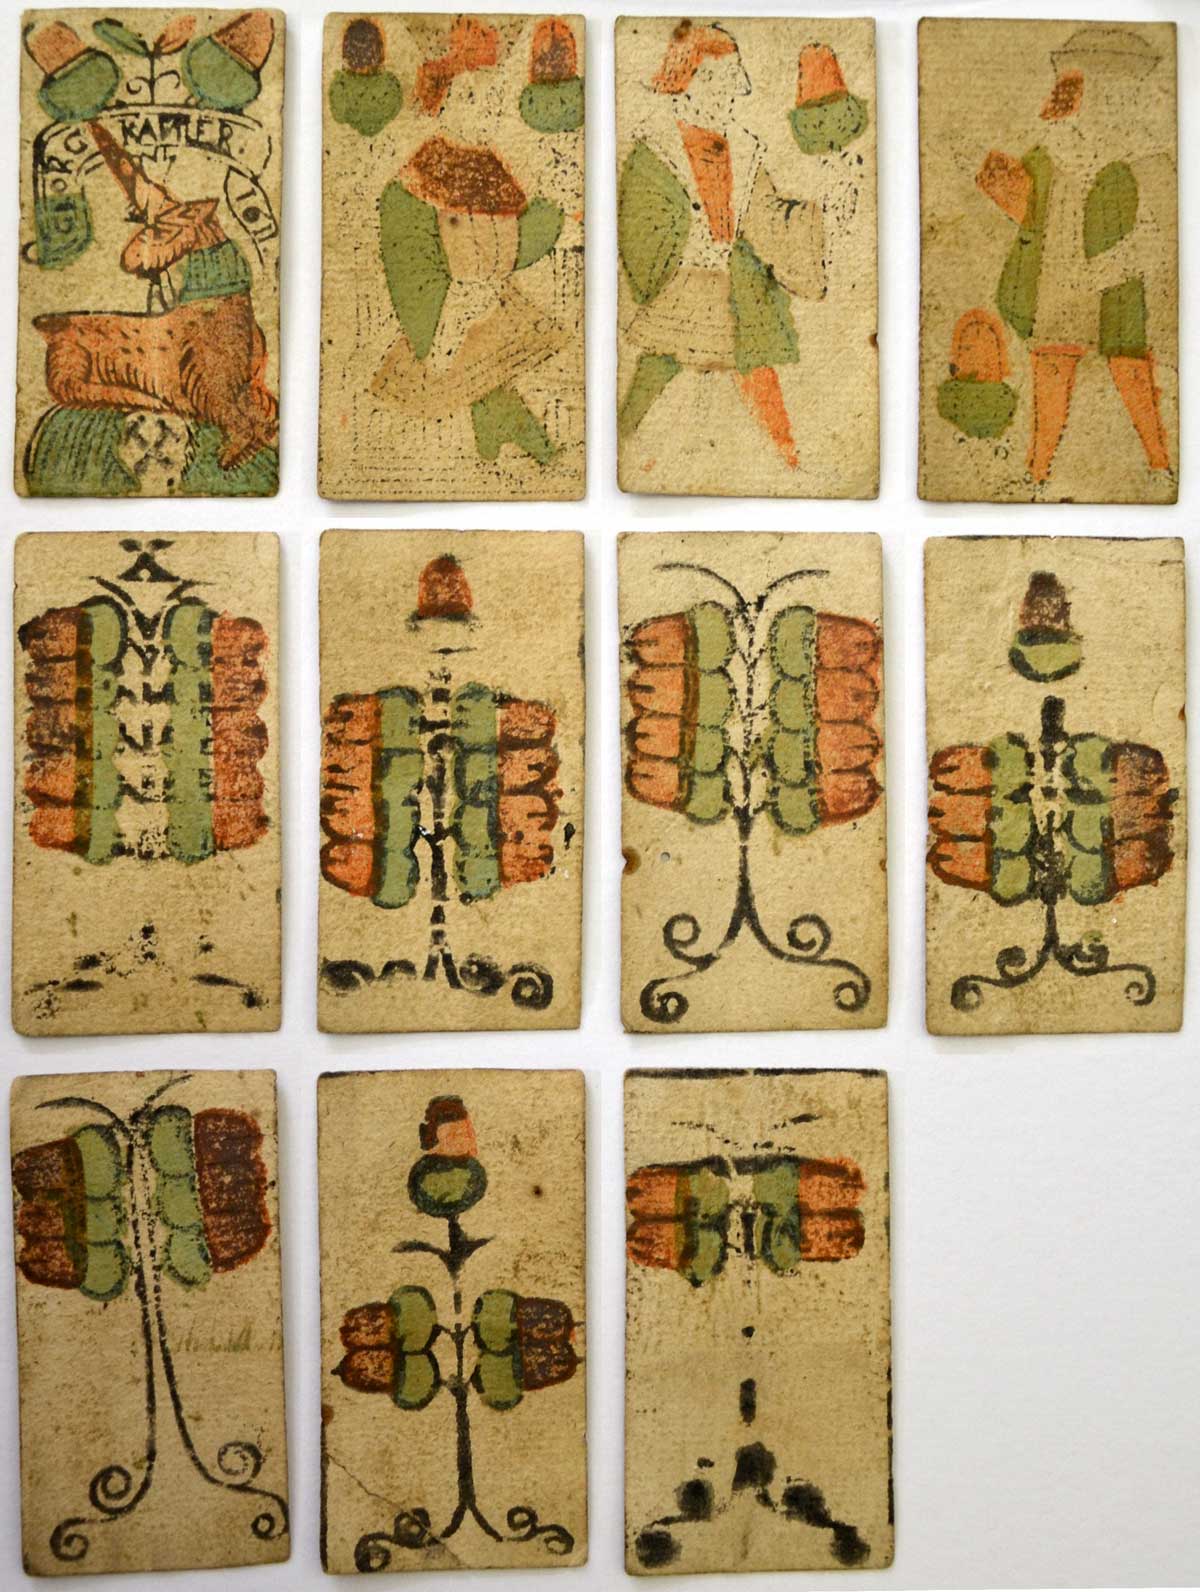 Bohemian playing cards of the German type manufactured by Georg Kapfler and dated 1611